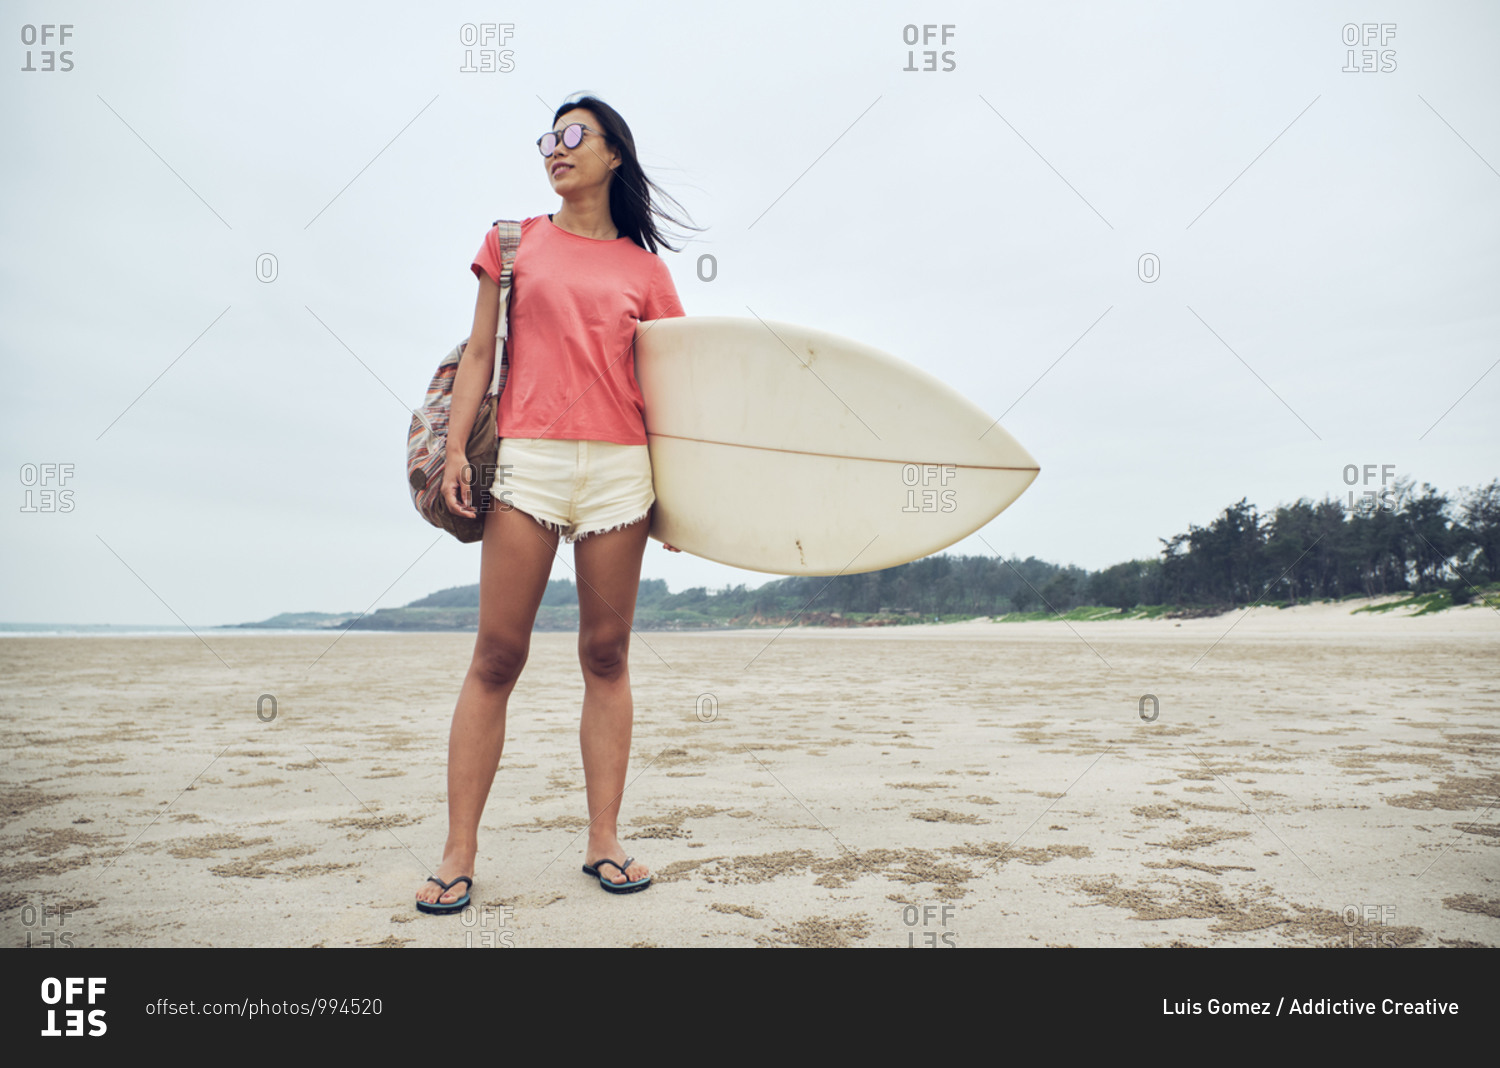 Full length young Asian female surfer in summer outfit walking on sandy beach and carrying surfboard against calm blue sea looking away